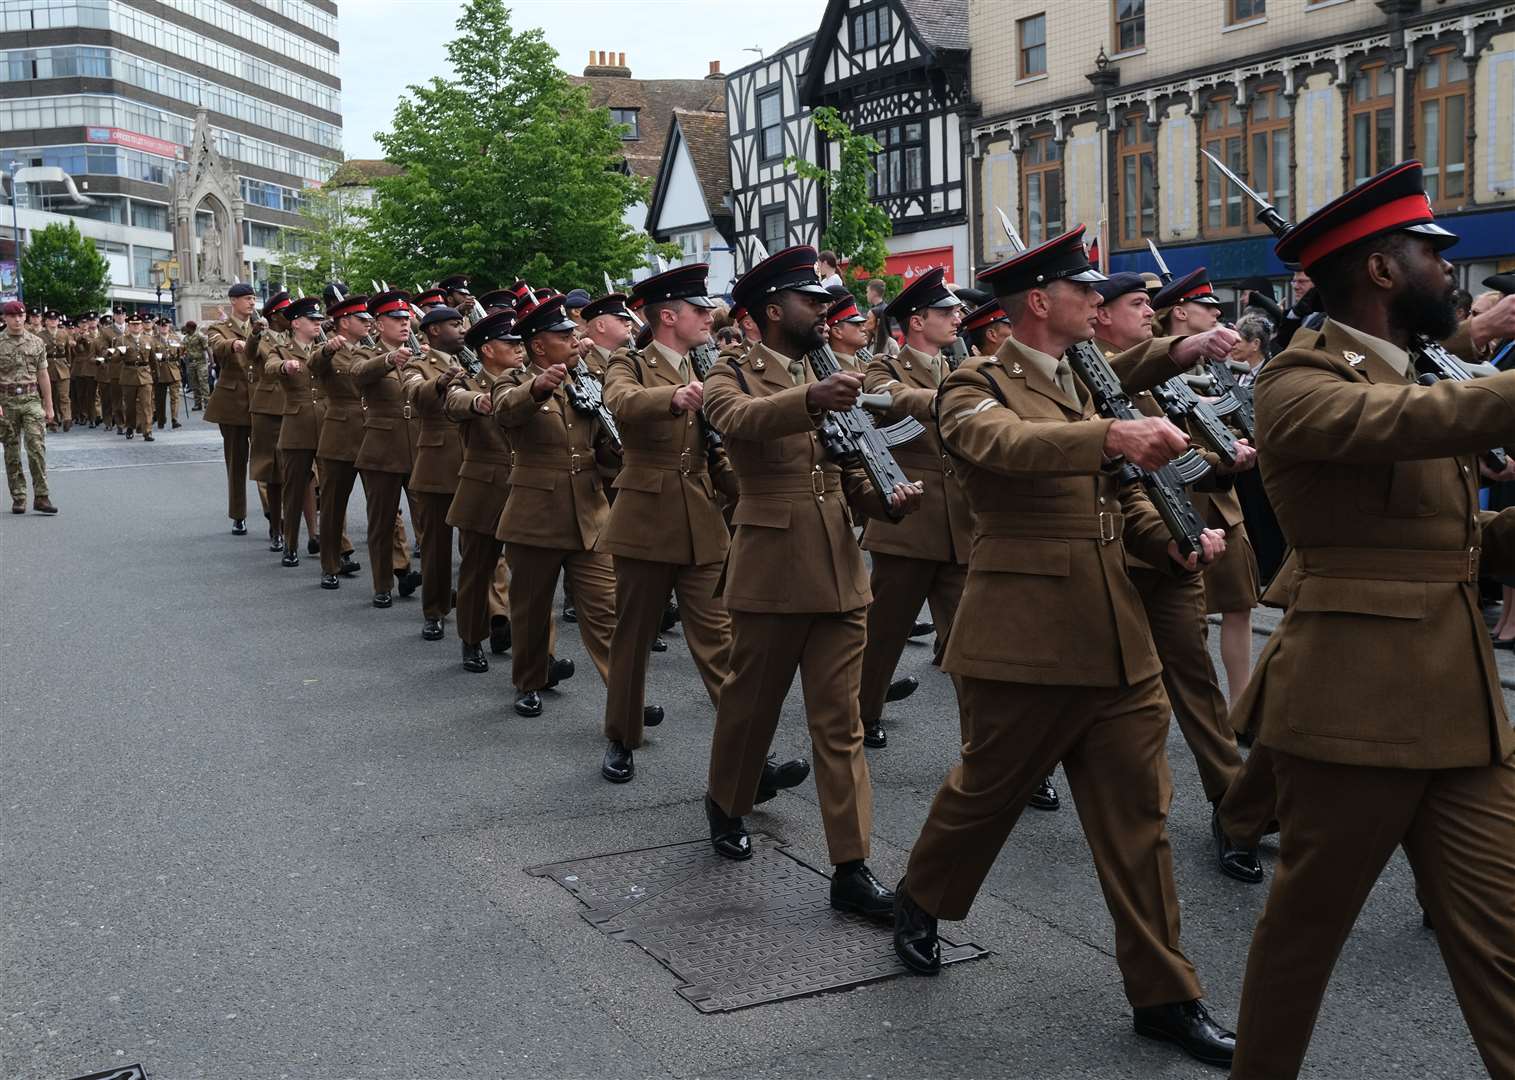 The 36 Engineer Regiment has been a featured of Maidstone for nearly 60 years